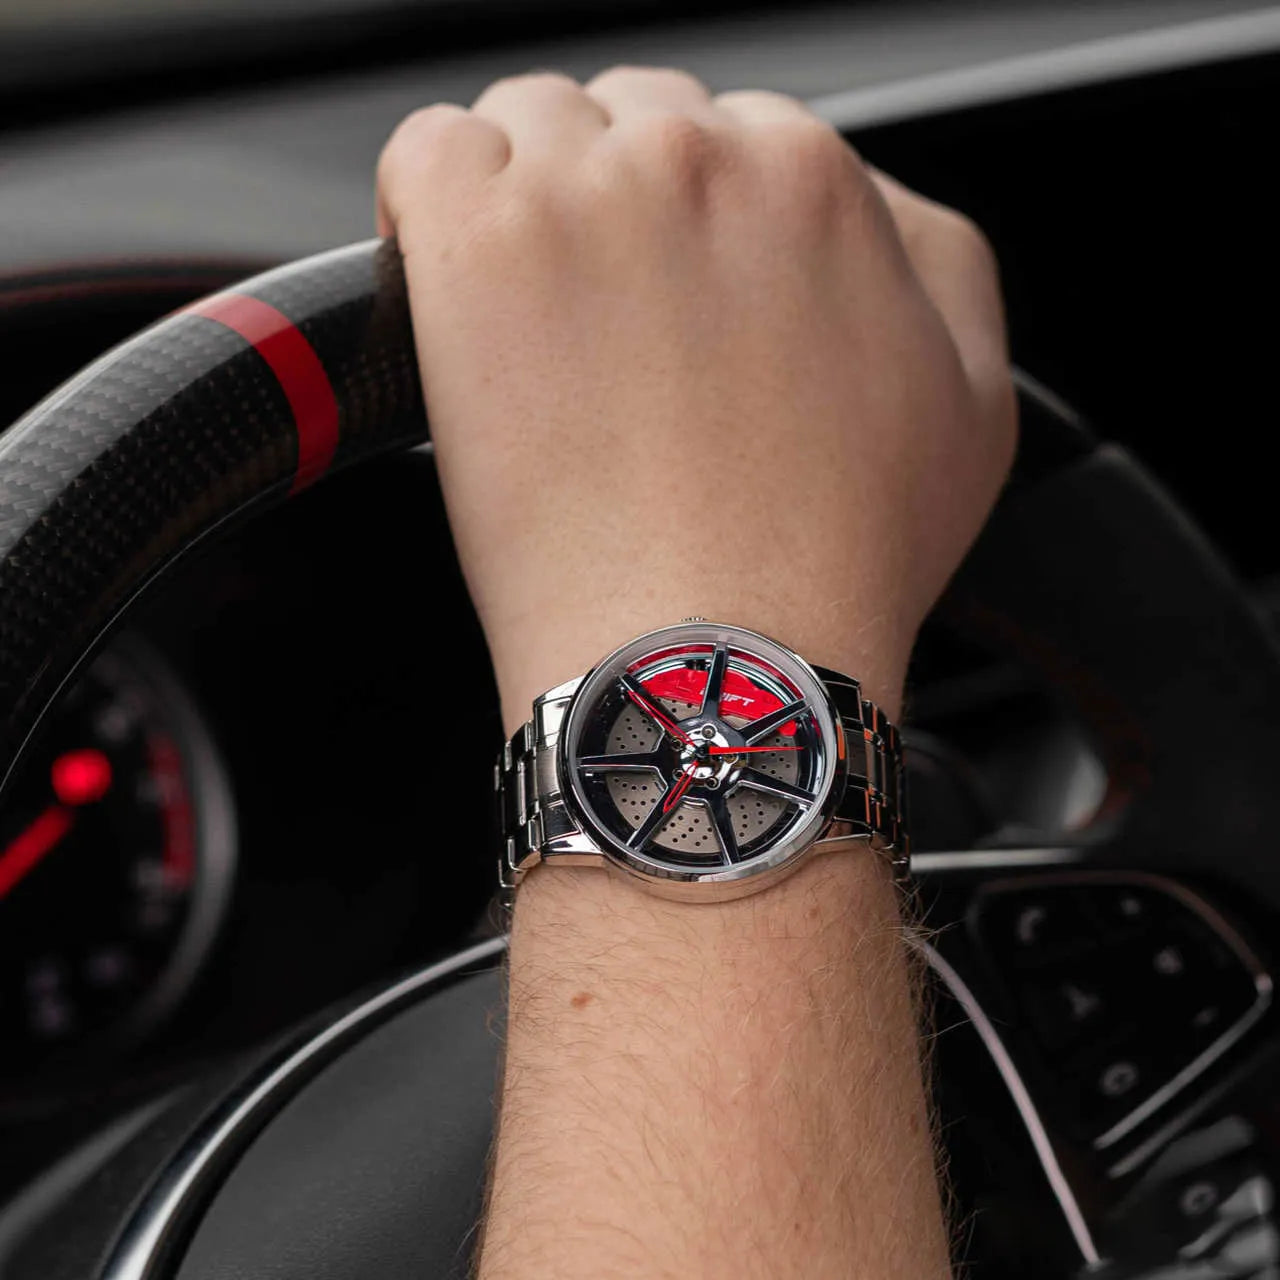 Discover the allure of the Silver-Black Drift Rim Watch – an emblem of innovative design, ideal for motorsport, tuning, and auto enthusiasts. Elevate your style with this creation from a dynamic German startup! #id_46779158004042